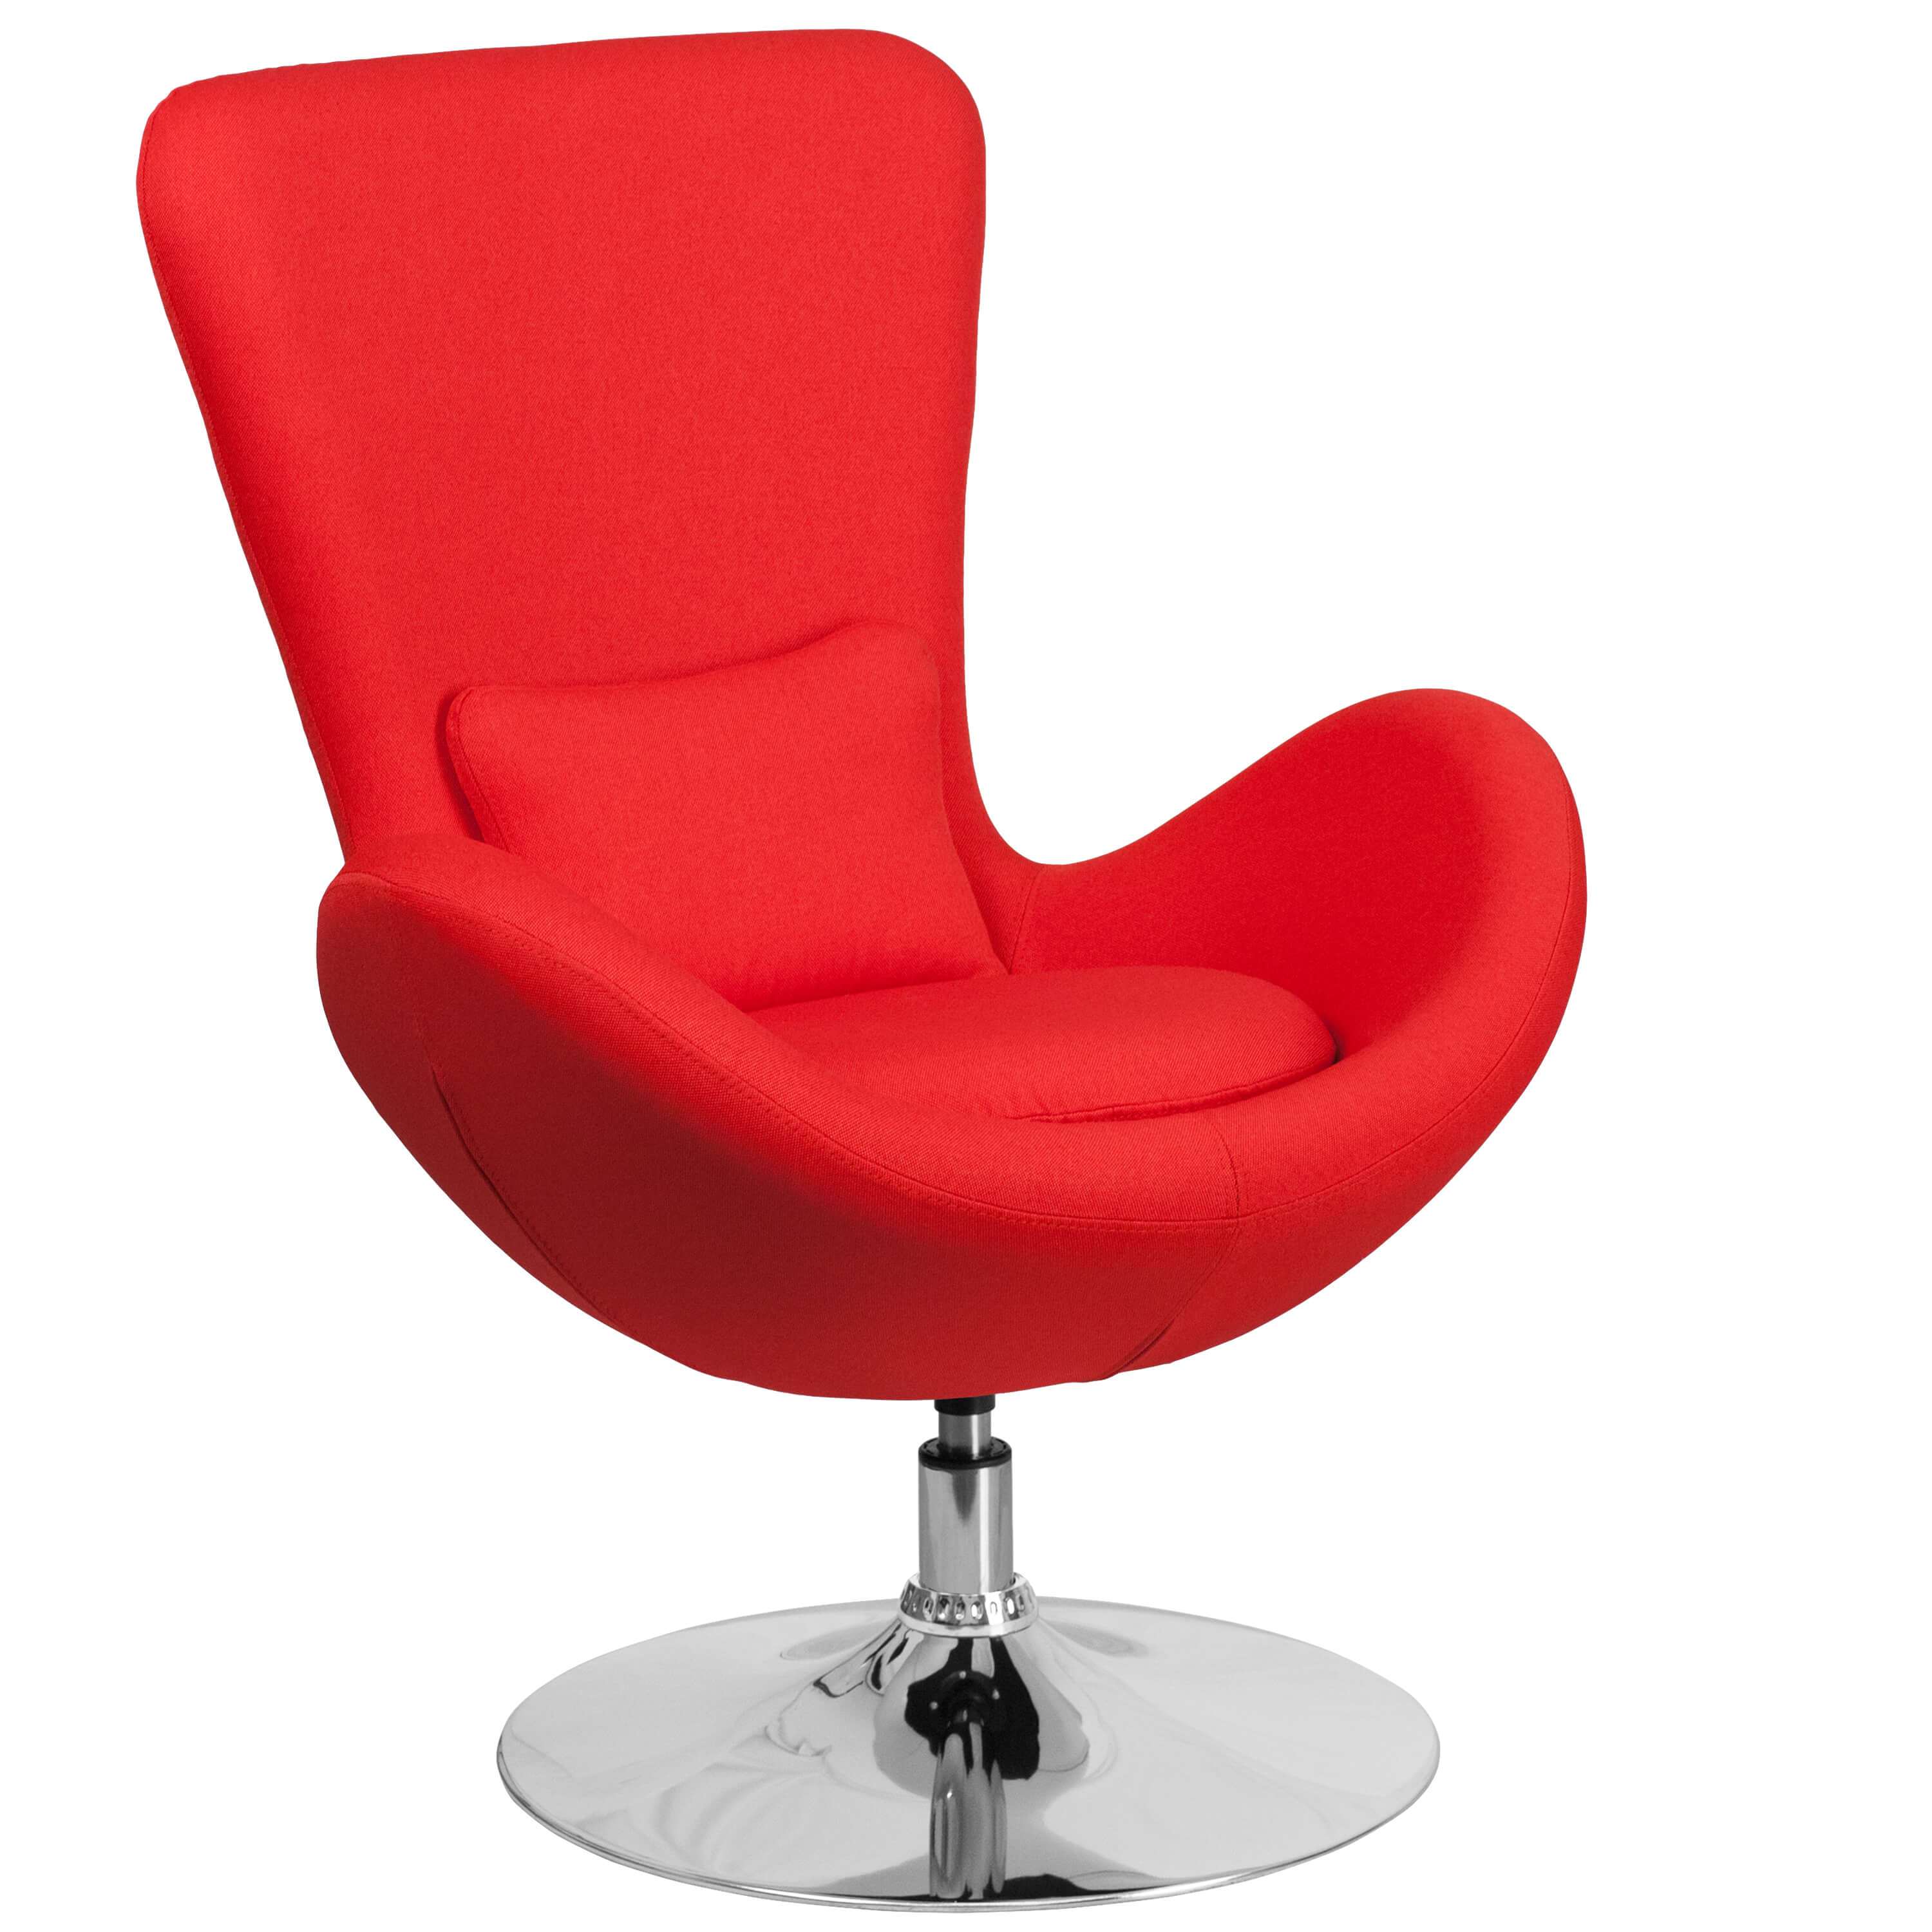 Office lounge chairs CUB CH 162430 RED FAB GG FLA